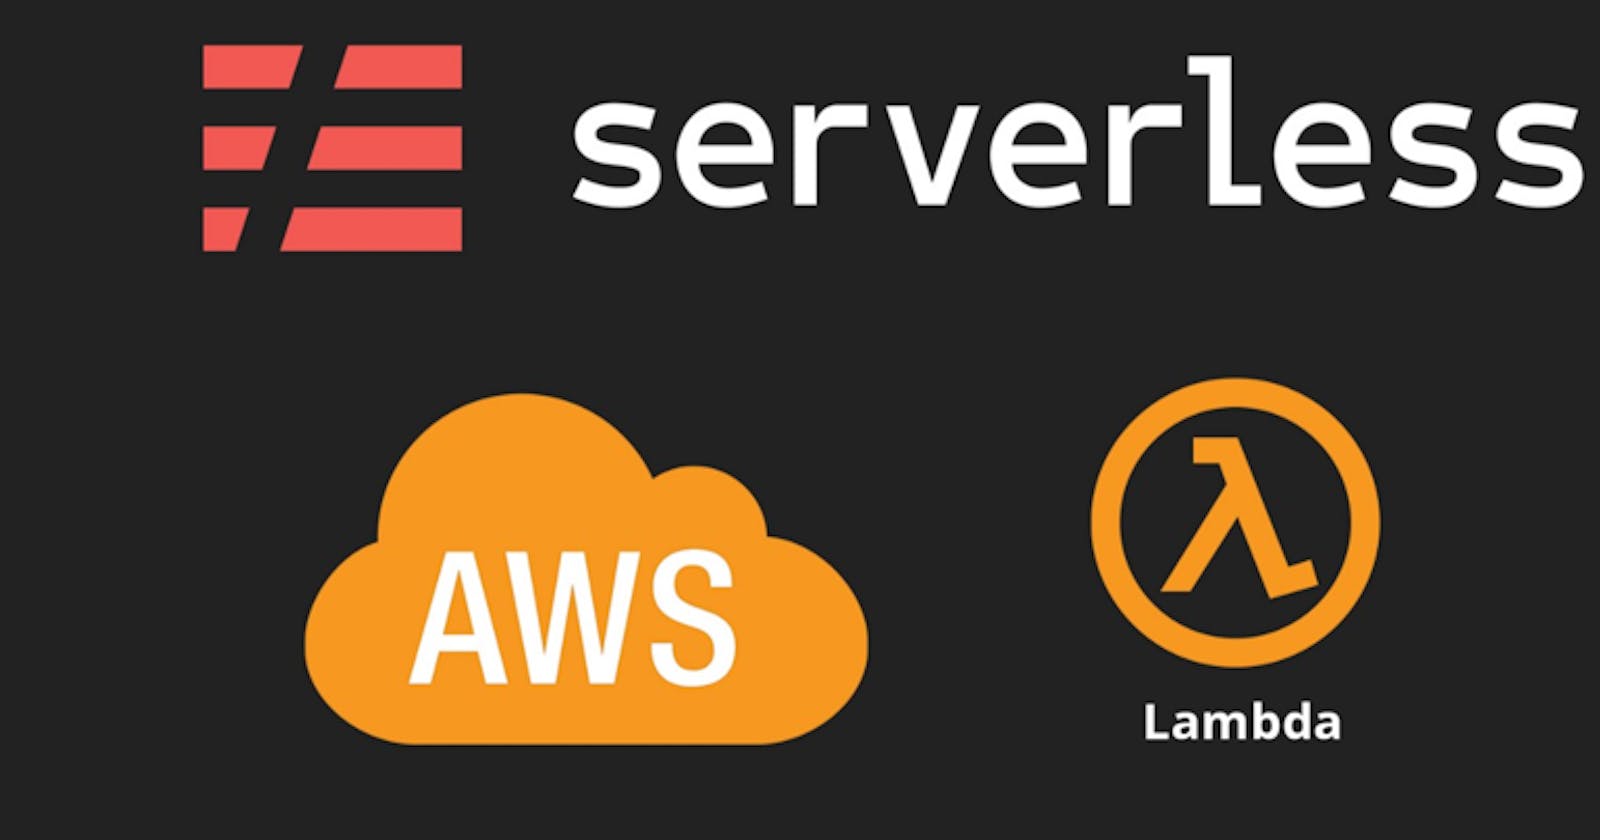 ServerlessArchitecture#04 AWS Lambda Cold Starts#PART-2 Keeping Connections Alive in WAY Different